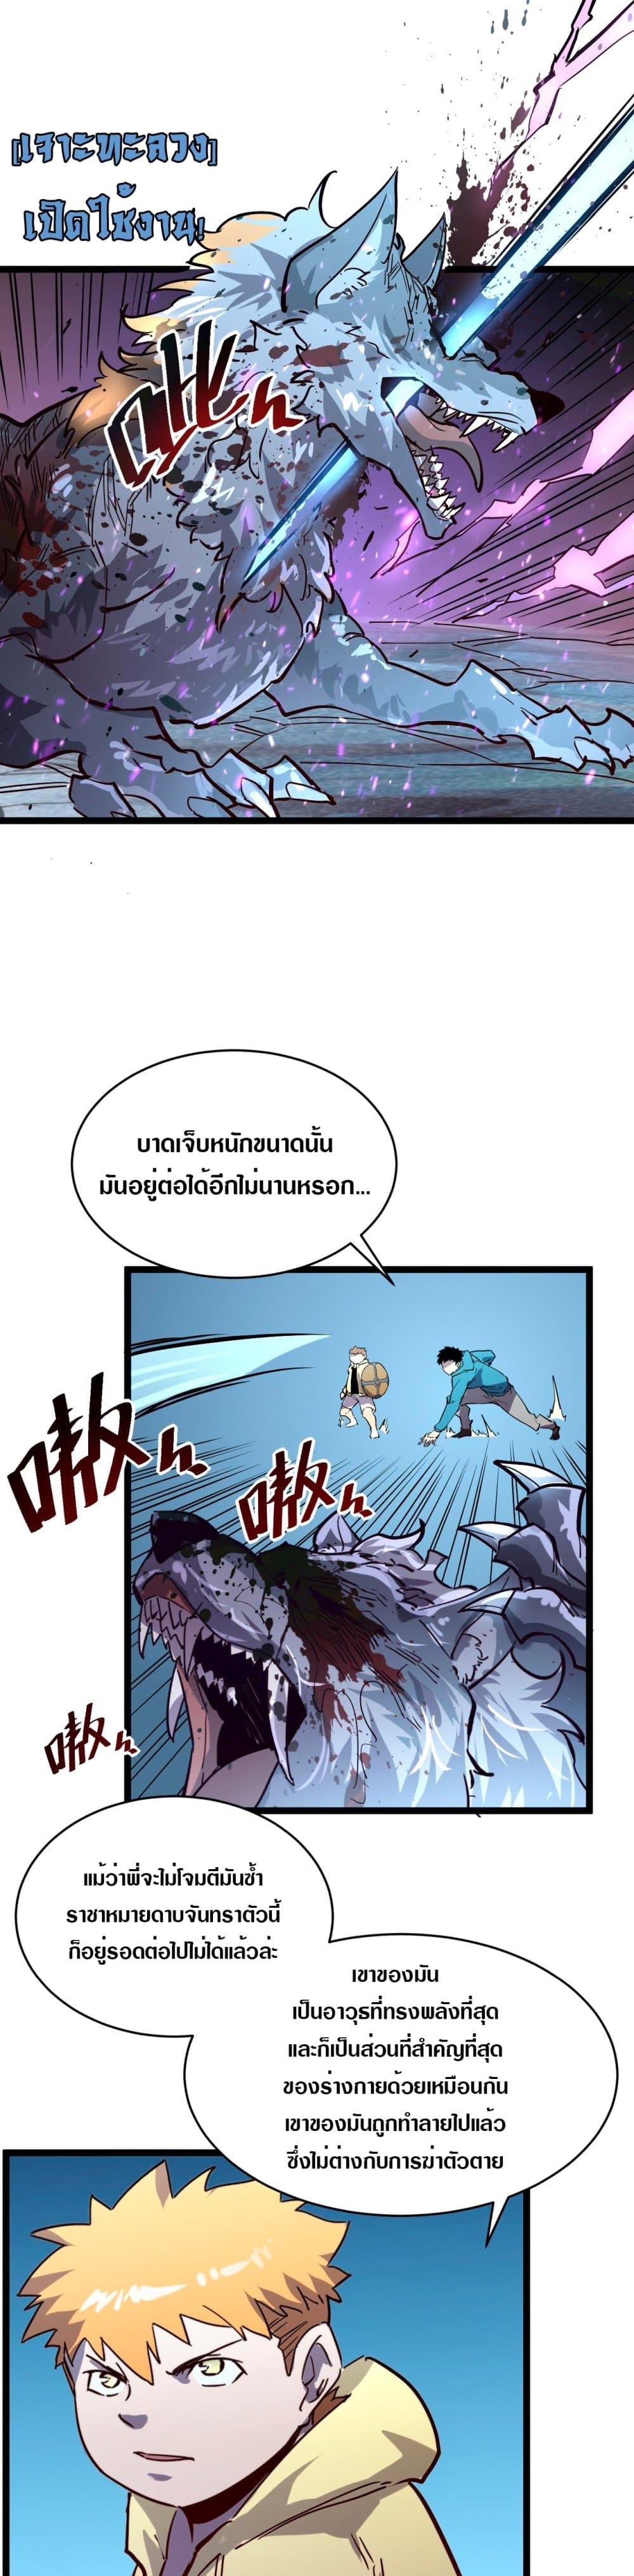 Rise From The Rubble เศษซากวันสิ้นโลก 29-29